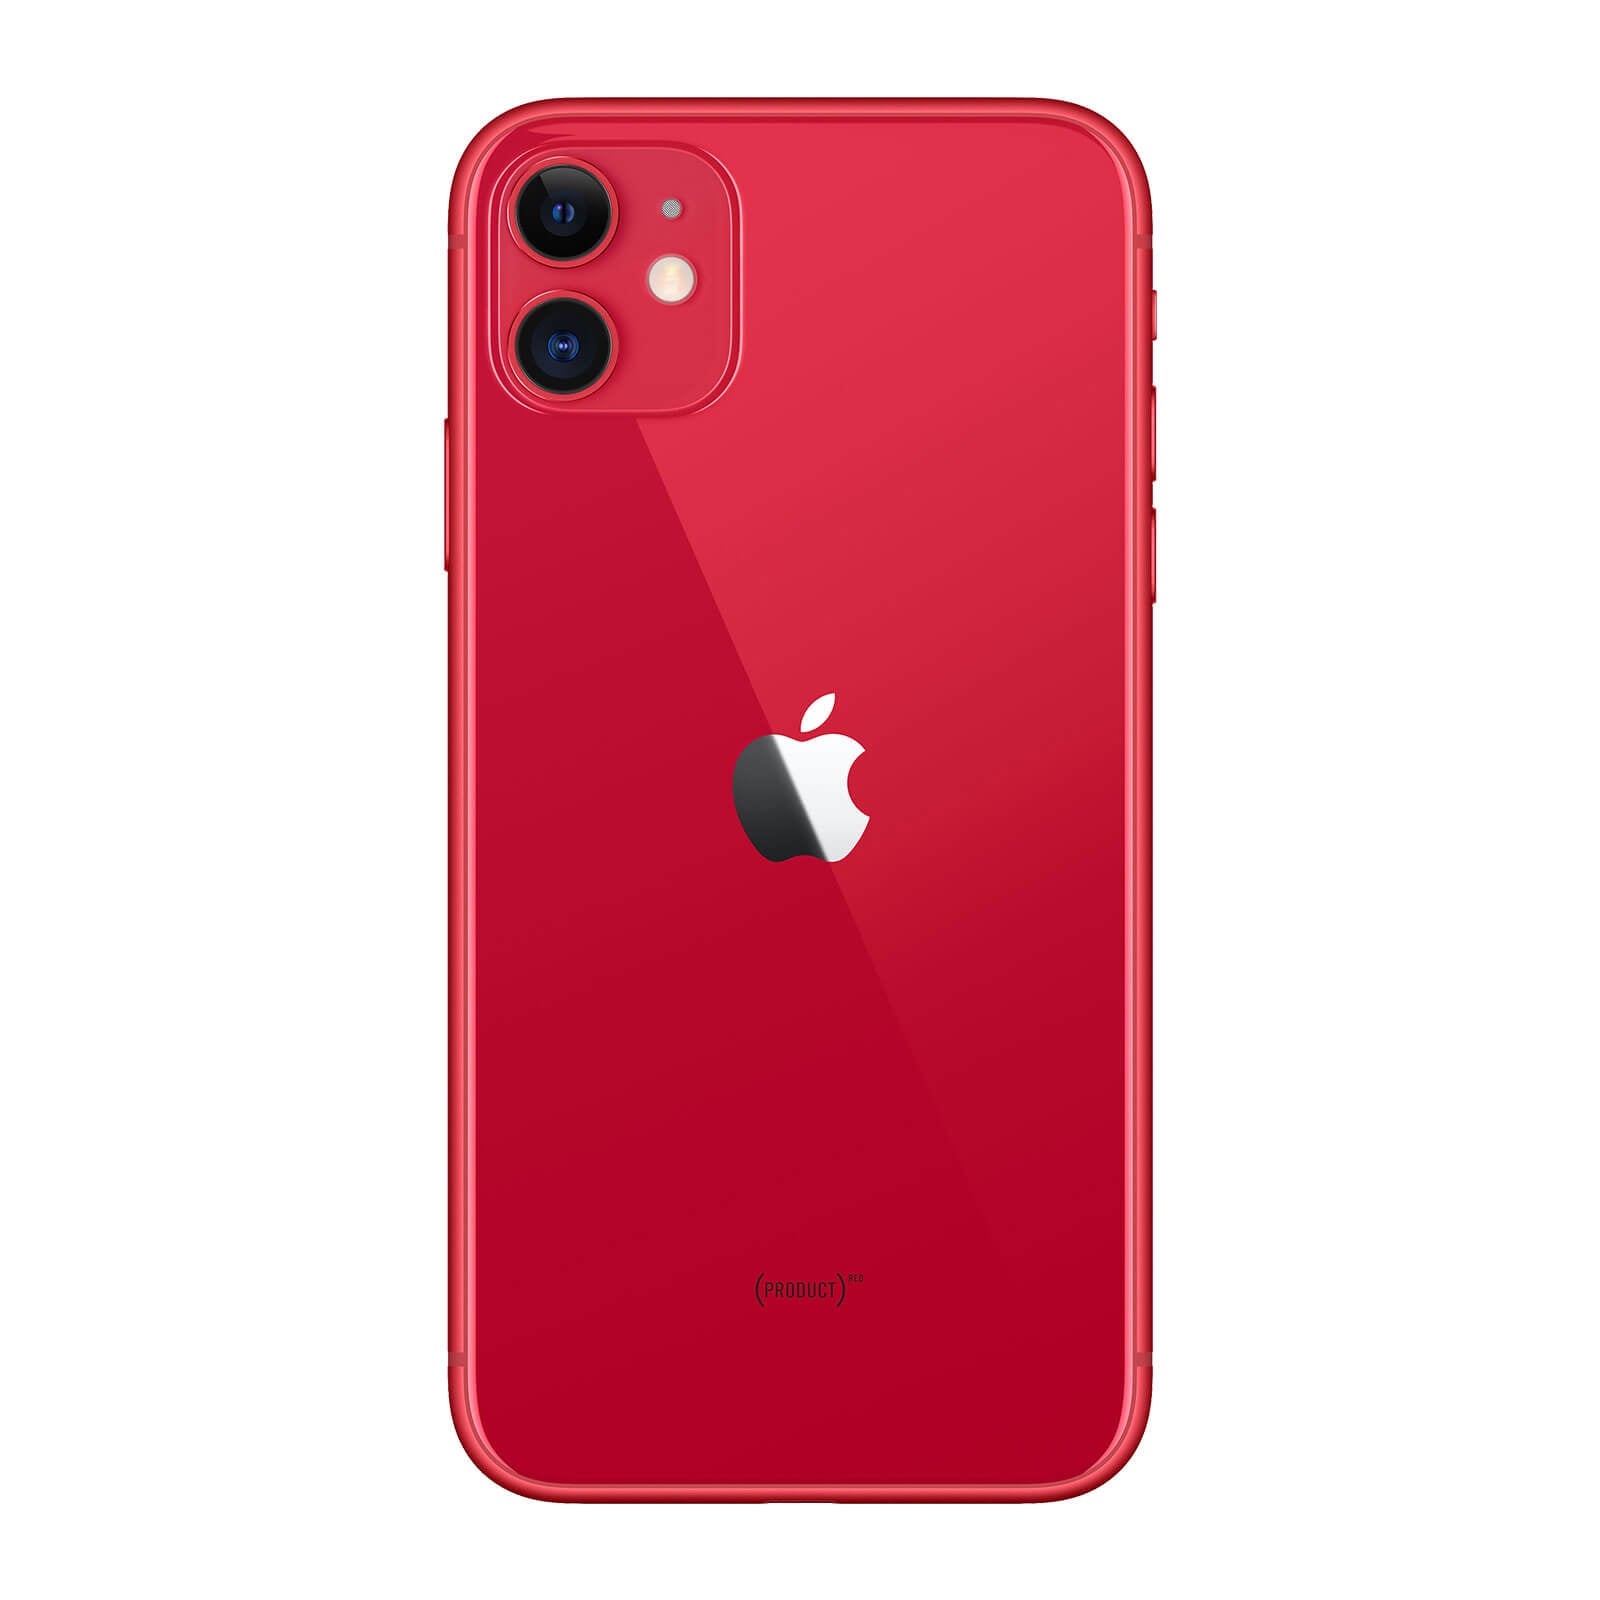 Apple iPhone 11 256GB Product Red Good - AT&T